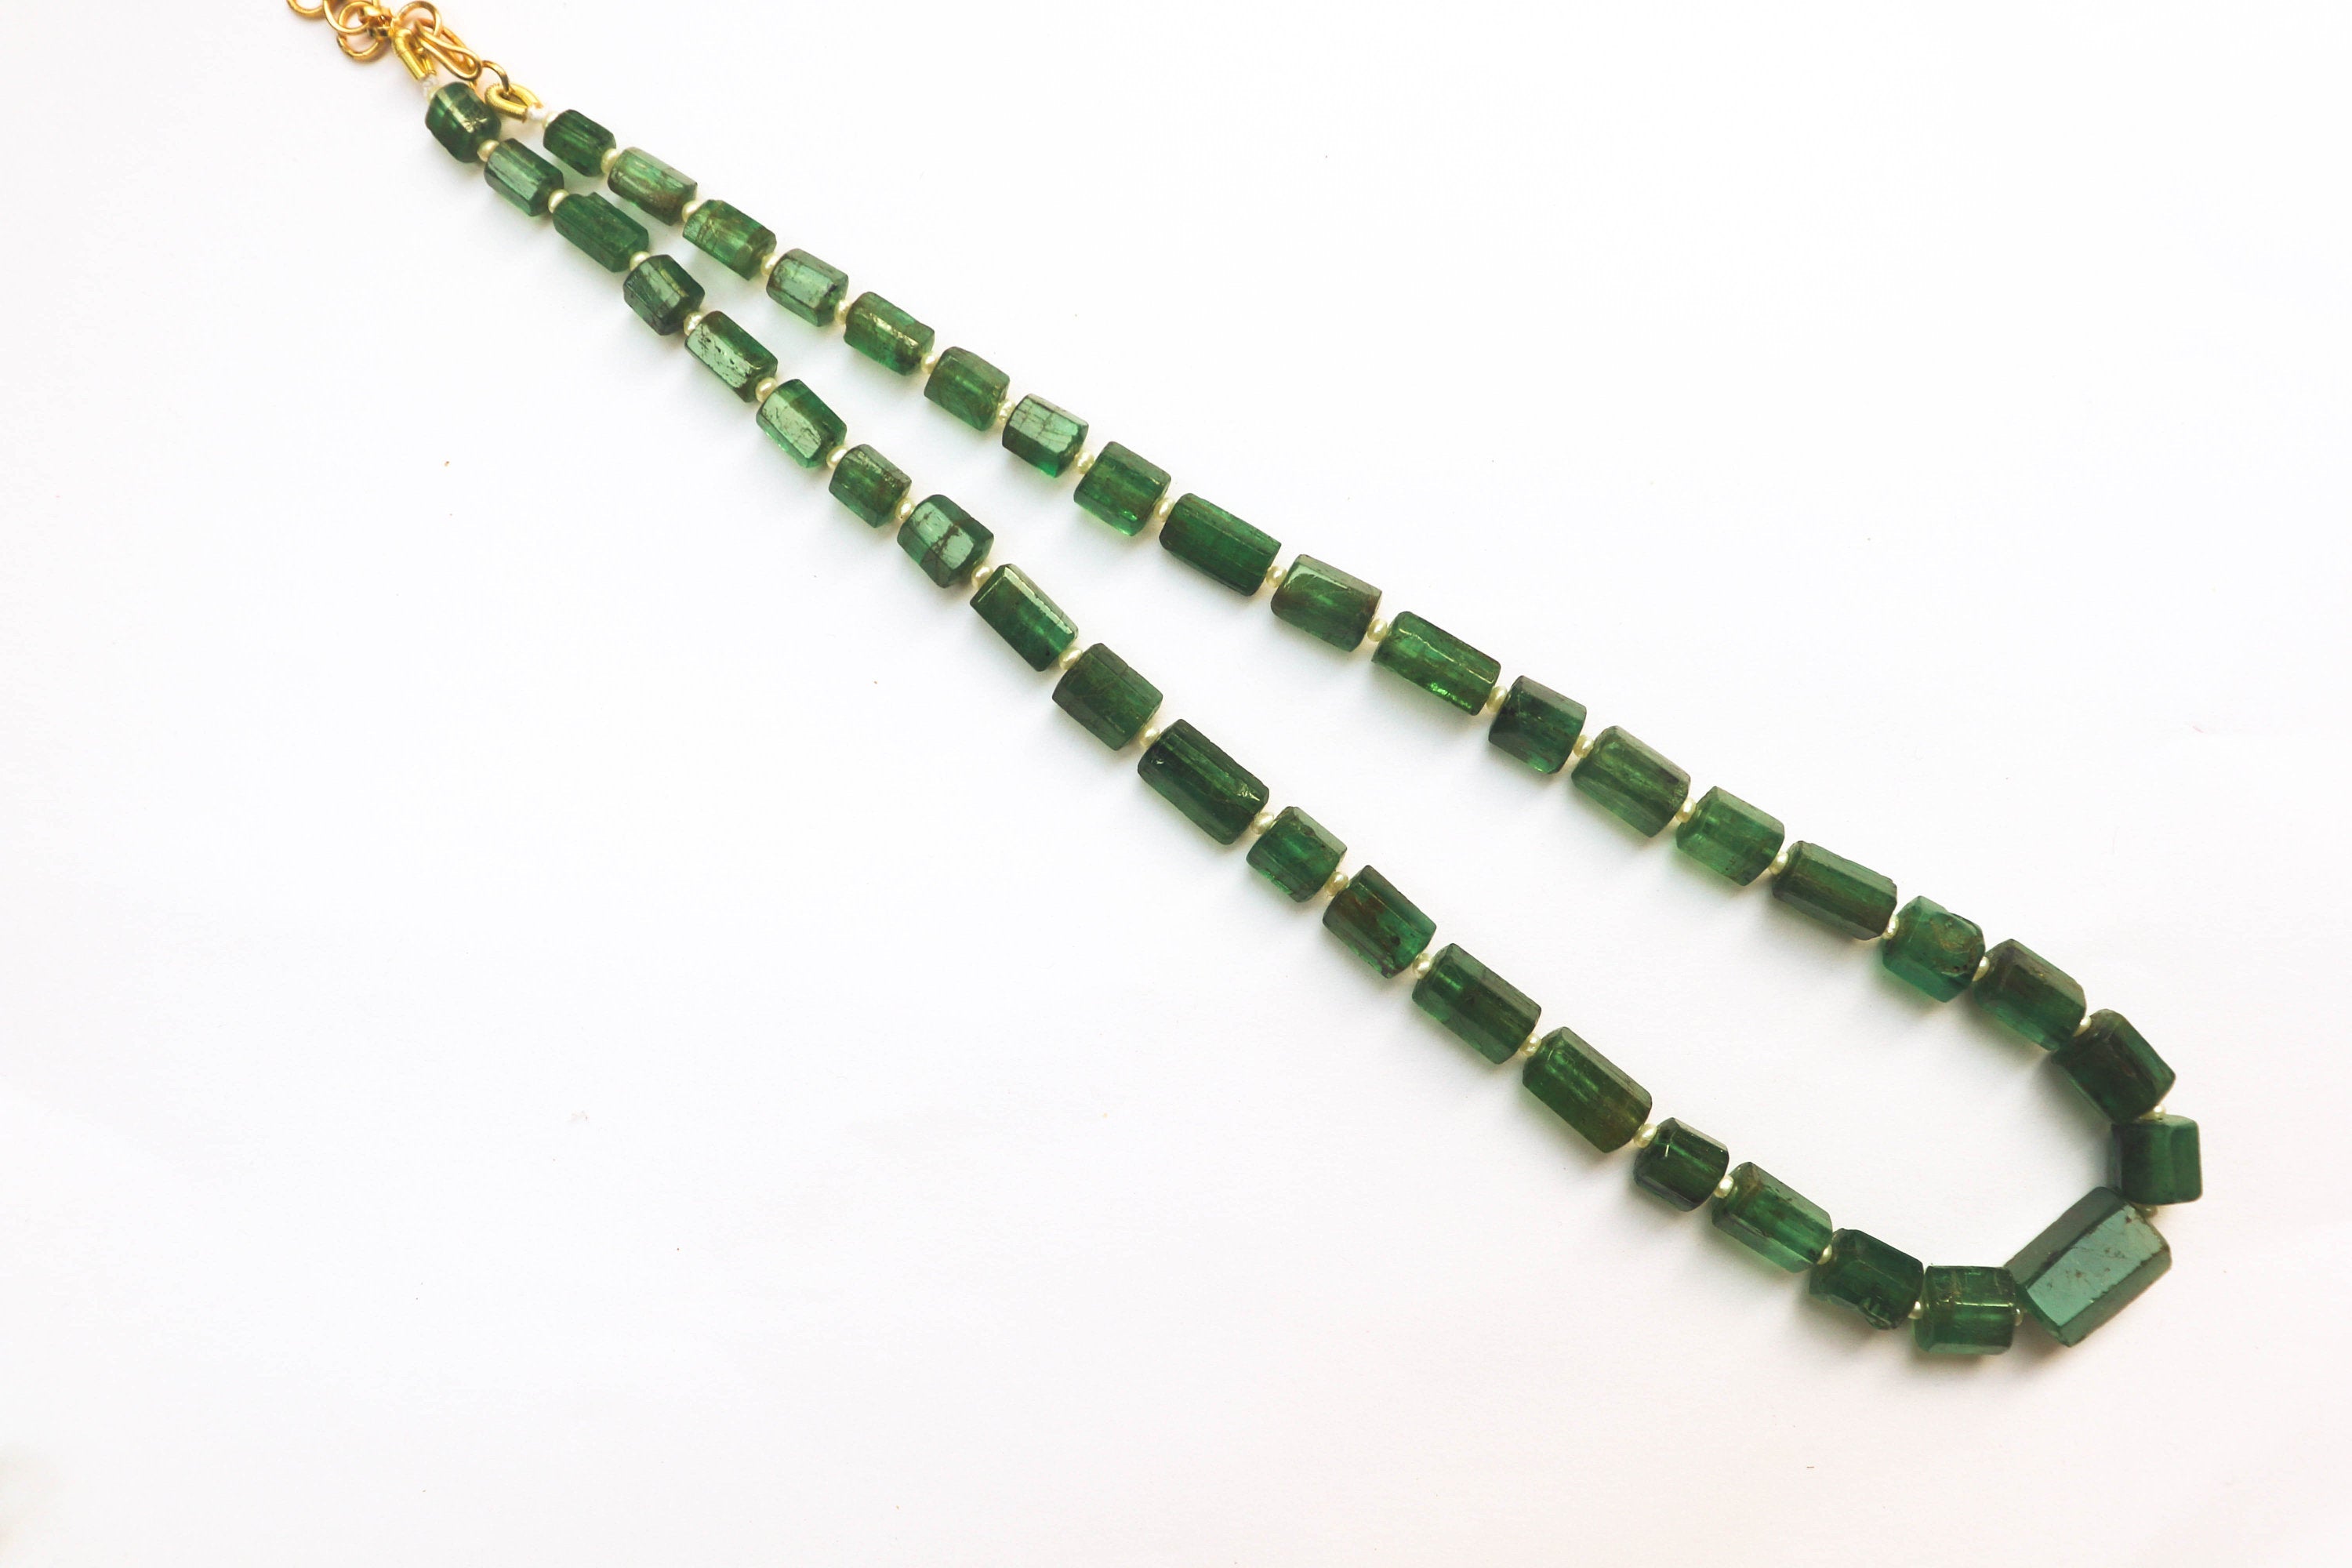 Emerald Beads Geometrical cut Cylinder shape | 16 inch | Zambian Emerald faceted Beads | Natural Emerald Gemstone beads for Jewelry making | Beadsforyourjewelry